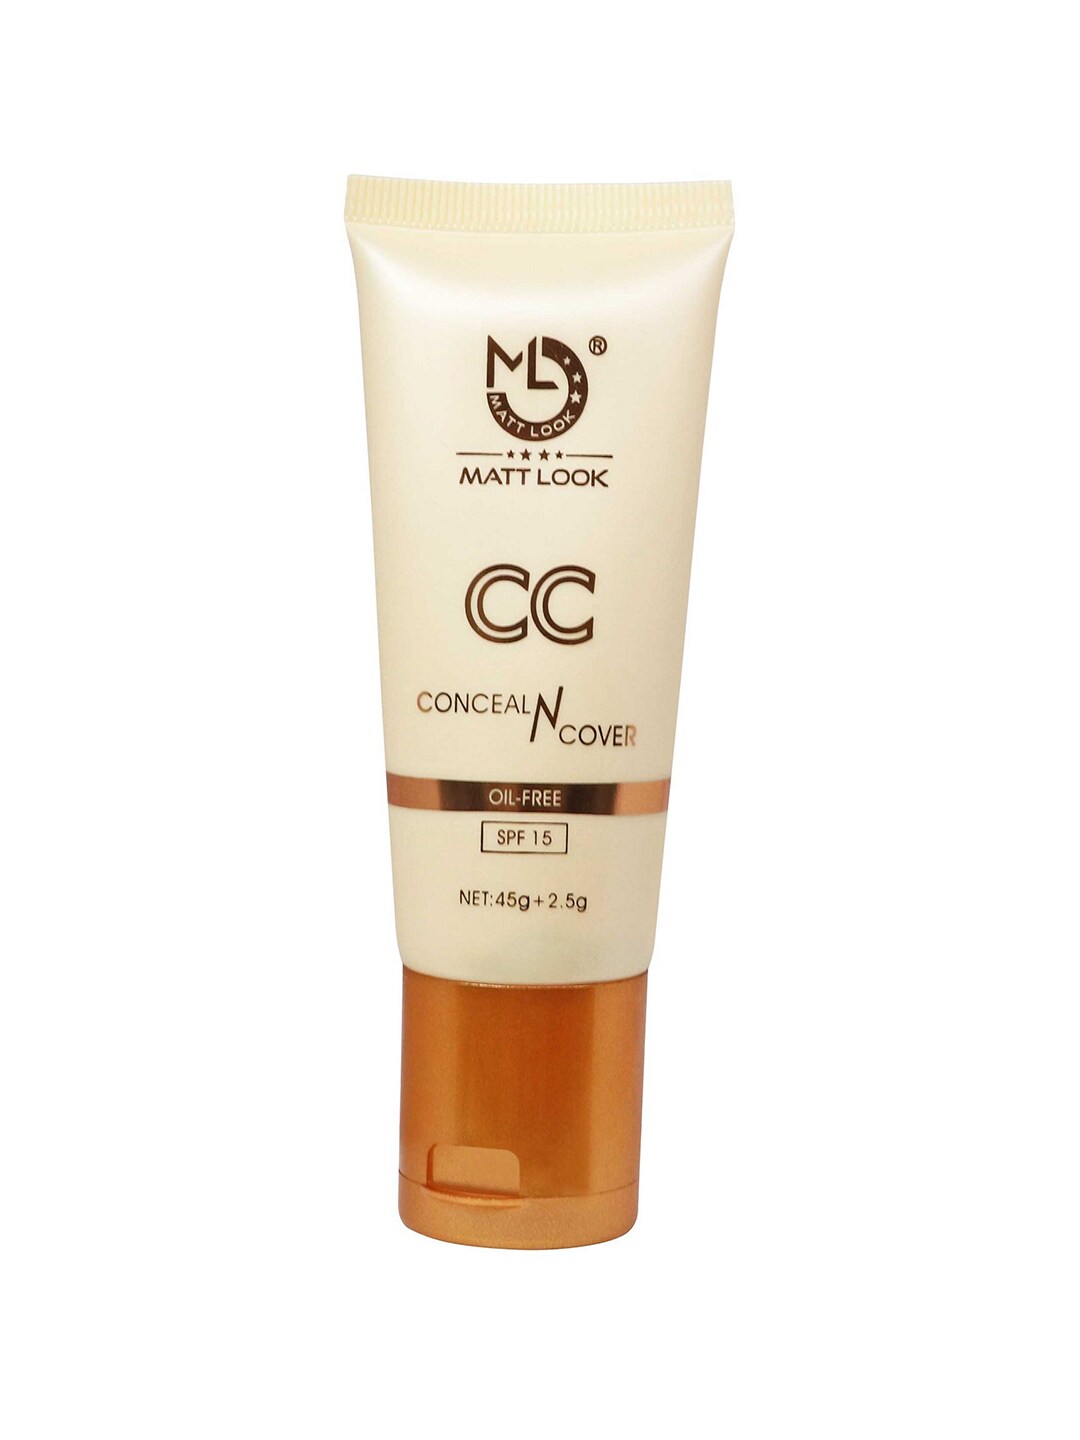 Mattlook Natural CC Conceal N Cover Oil-Free SPF-15, 45gm+2.5gm Price in India